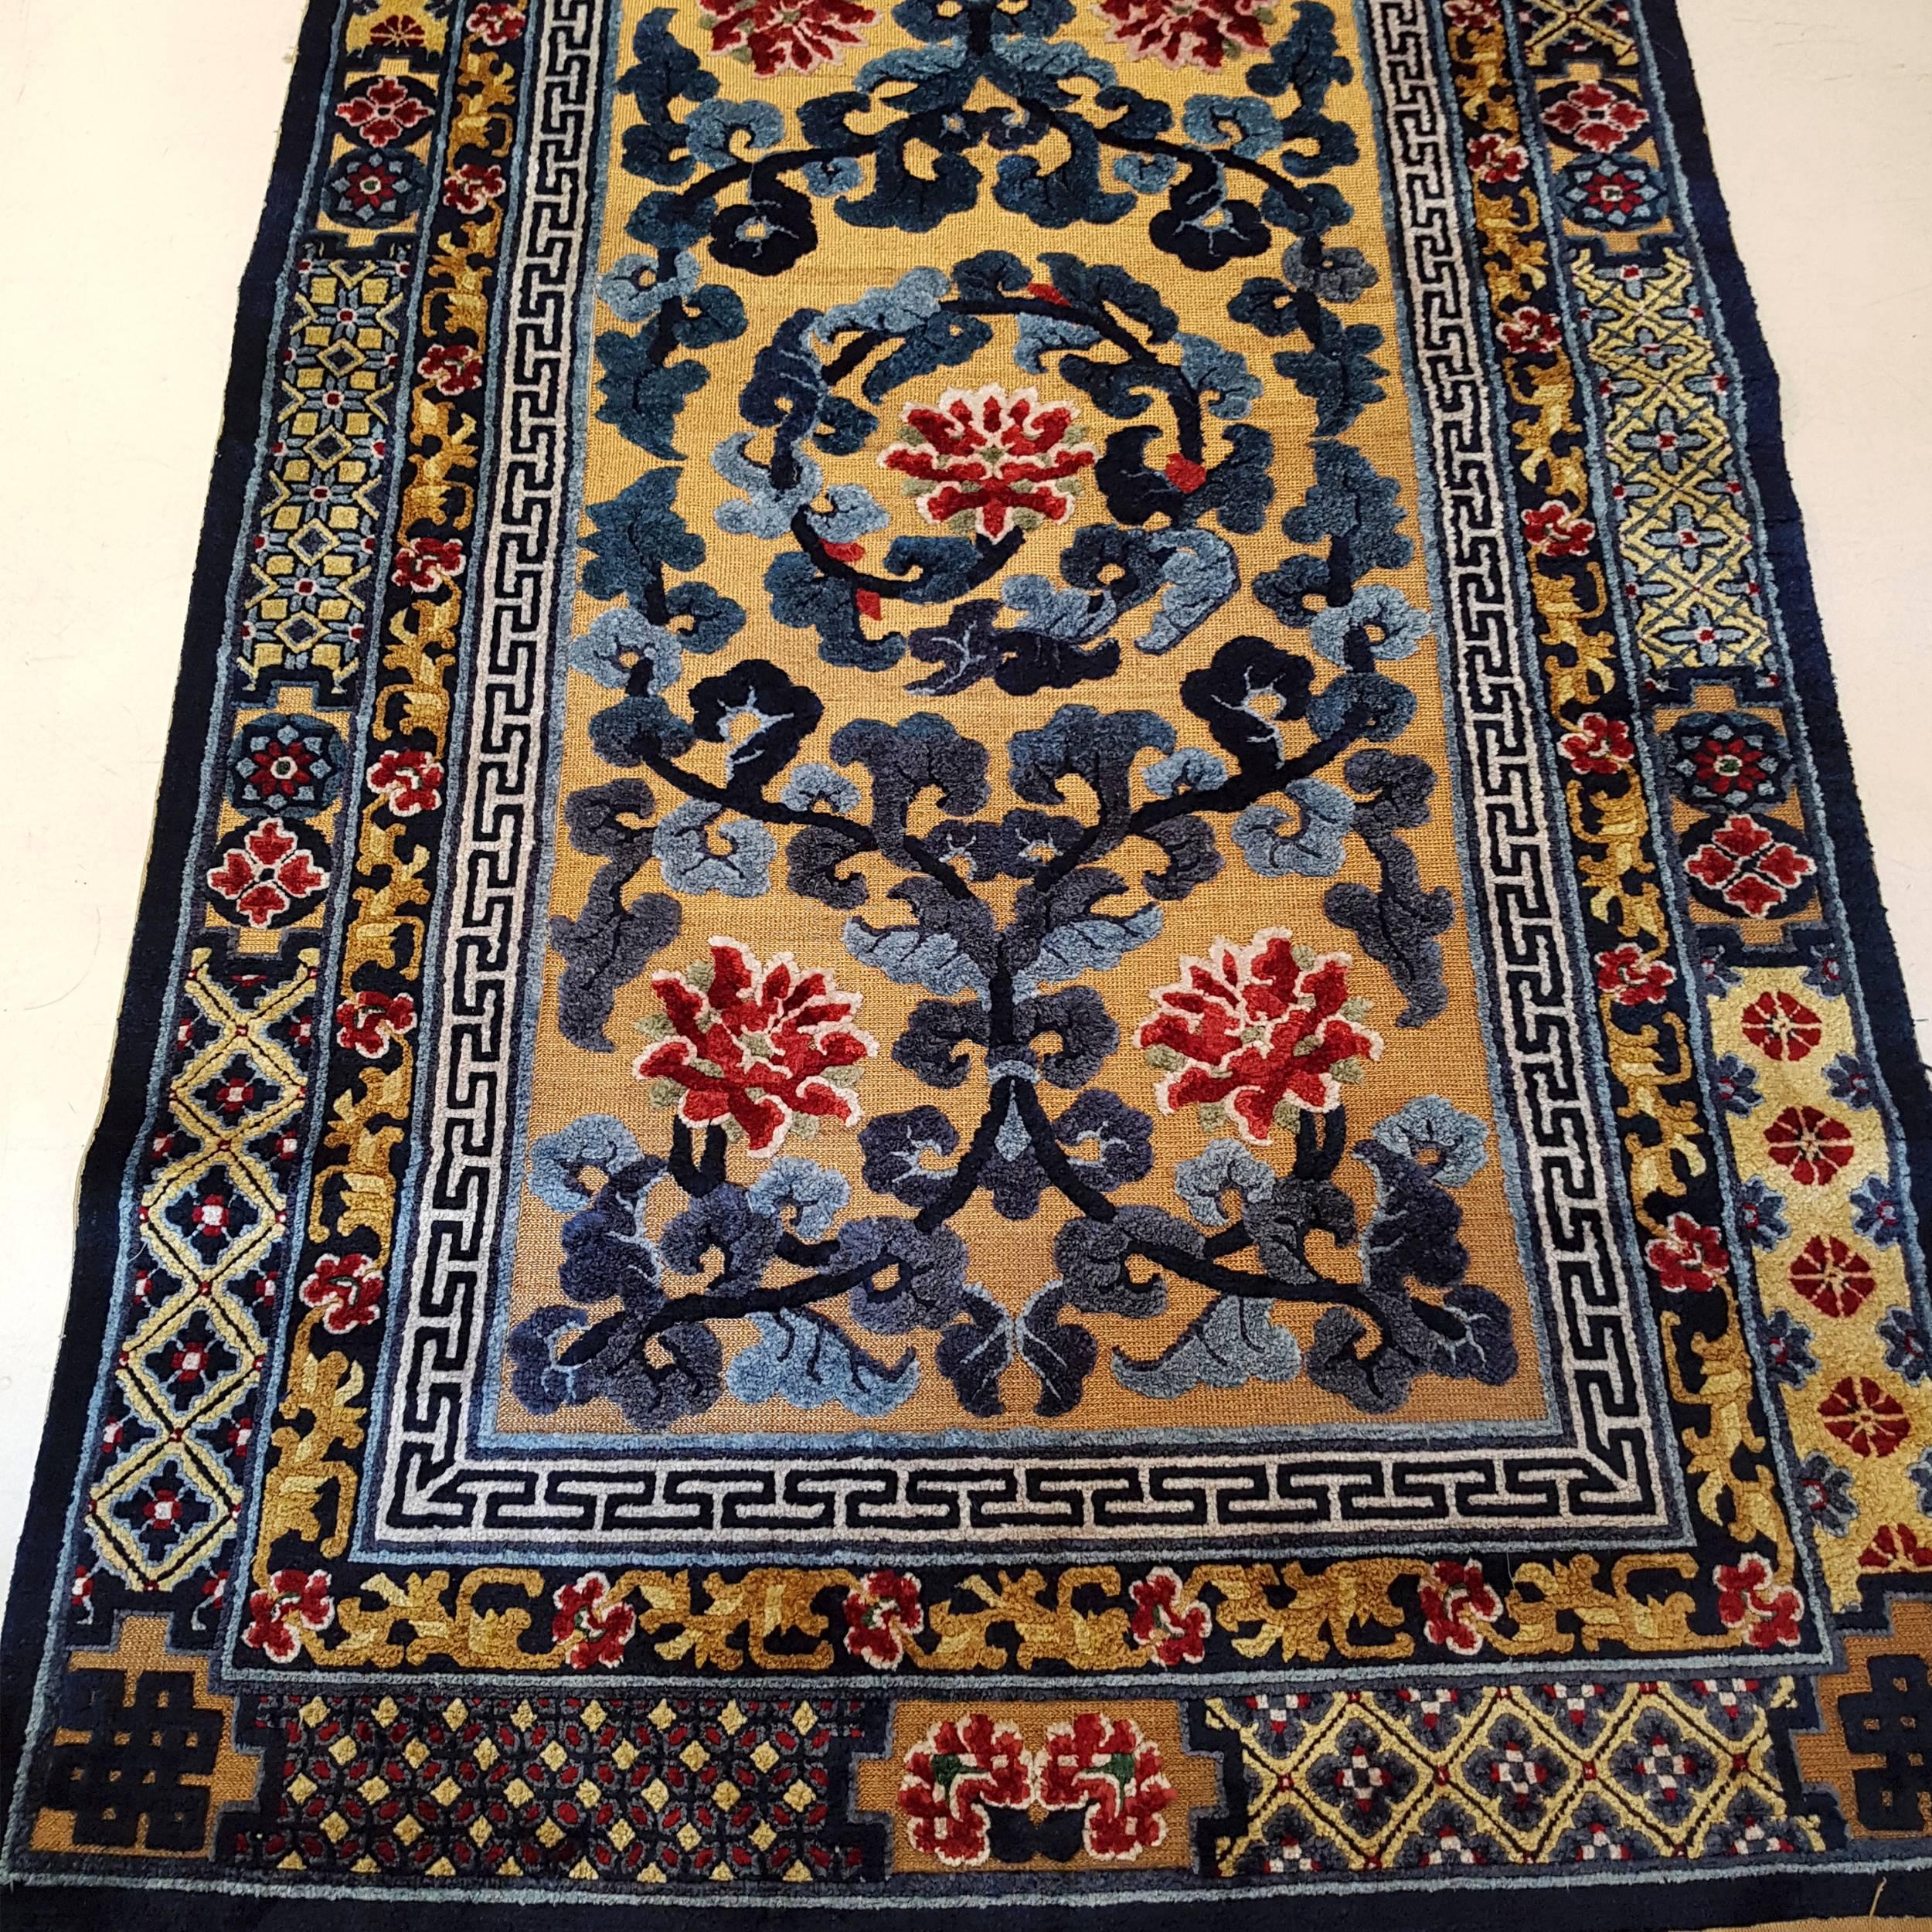 Silk and Metallic Thread Chinese Rug with Lotus Flowers 1